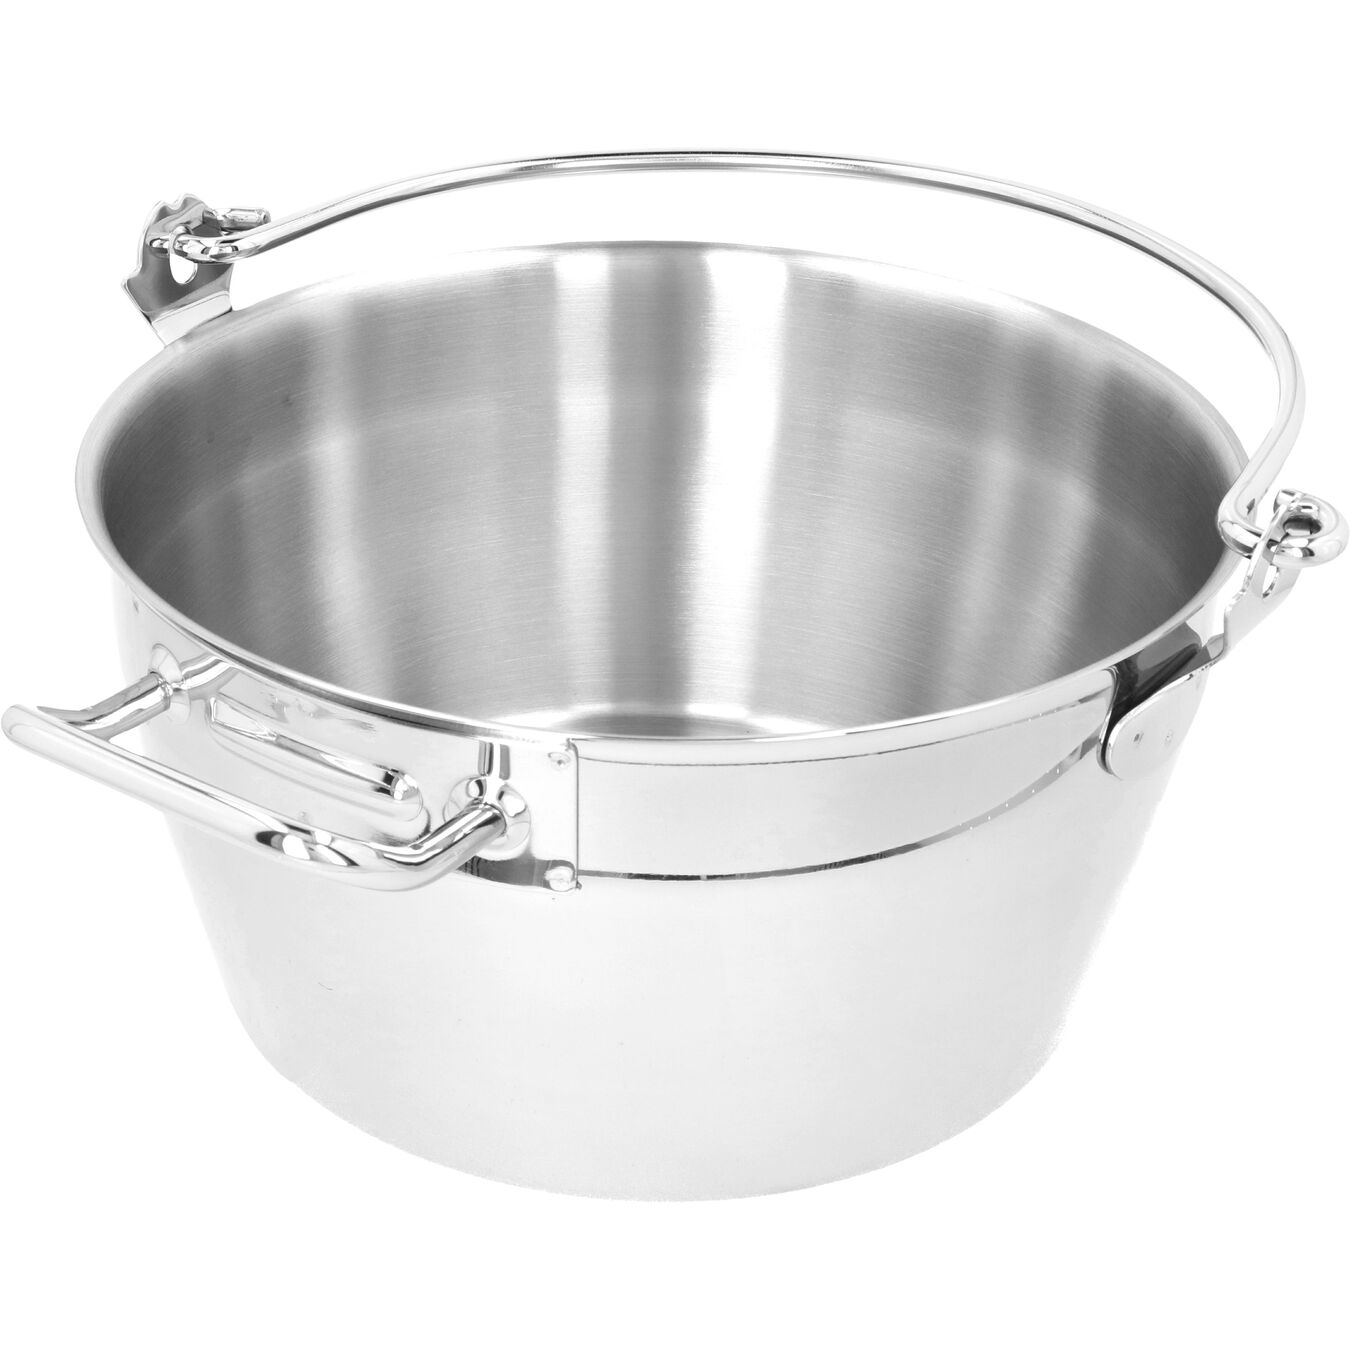 10.6 qt, 18/10 Stainless Steel, Maslin Pan,,large 6